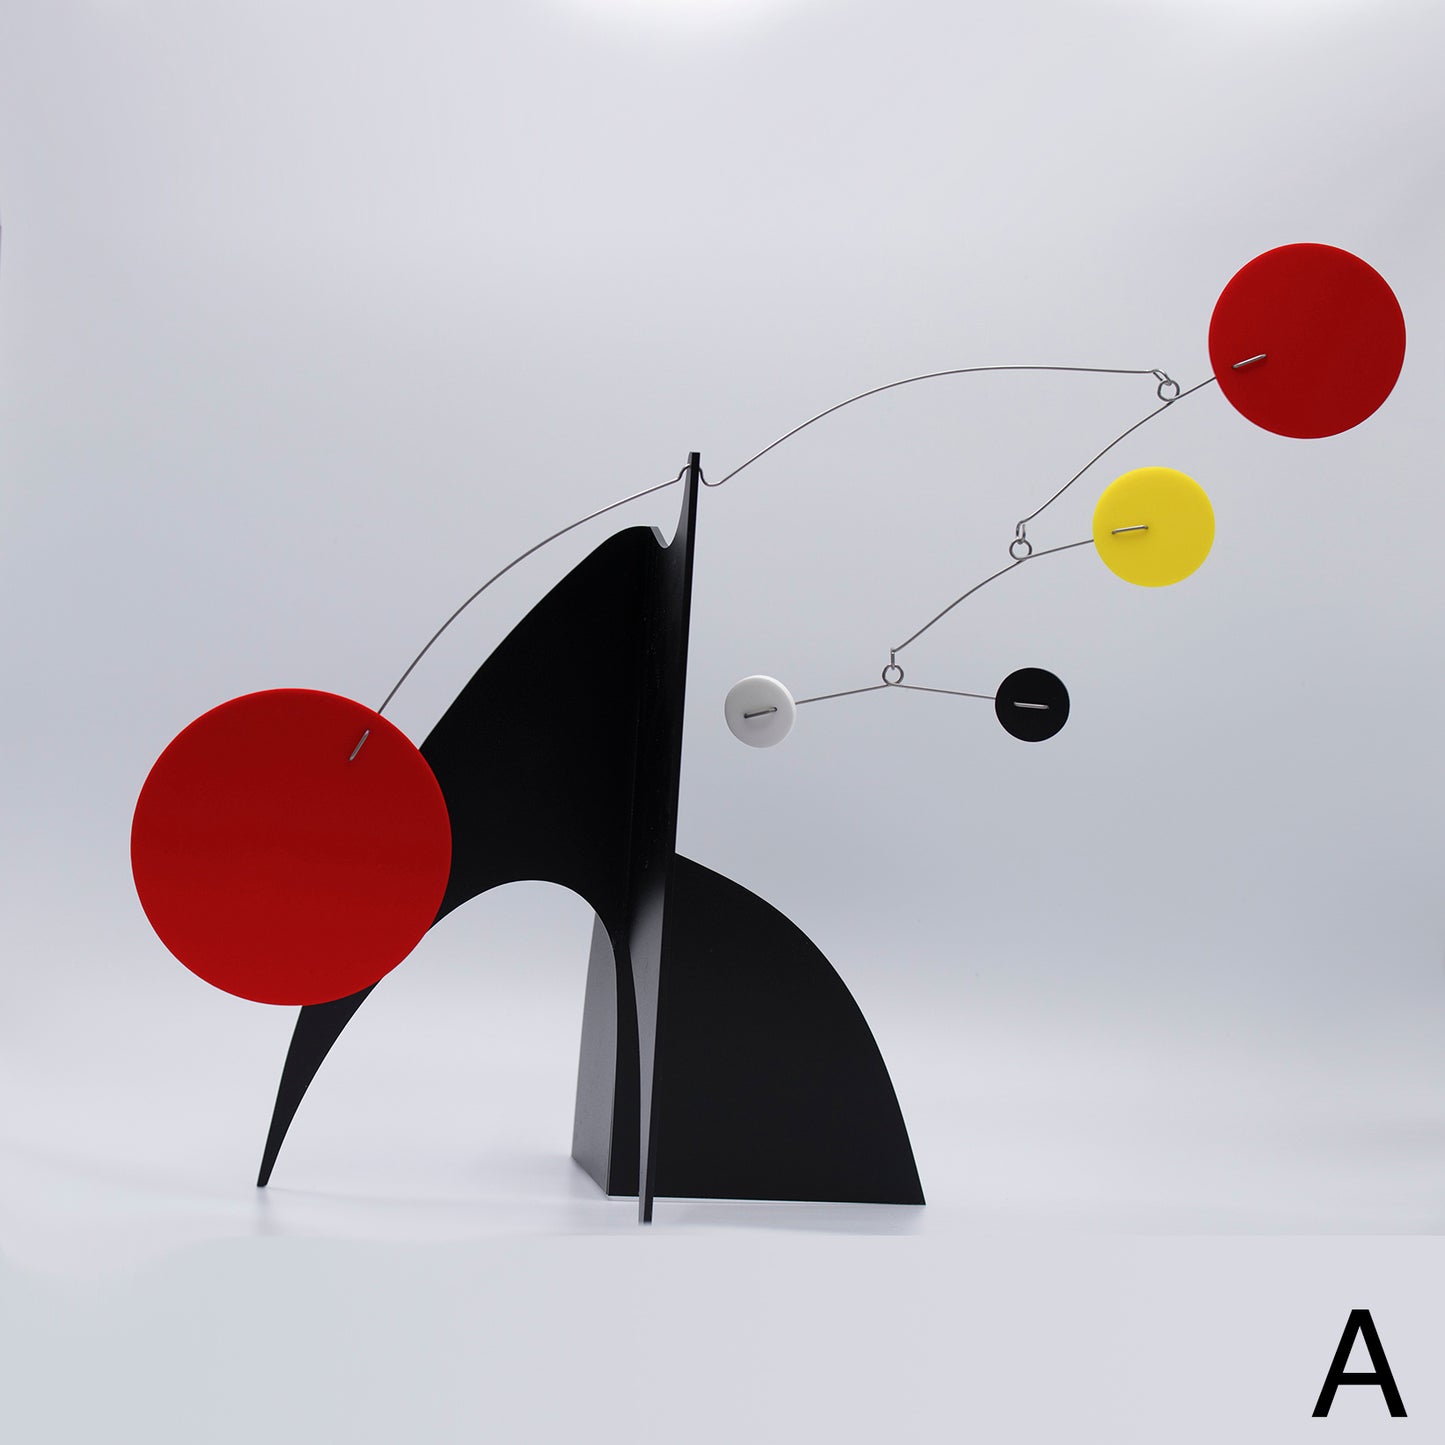 The Moderne Kinetic Art Stabile Sculpture by AtomicMobiles.com - black, red, white, yellow